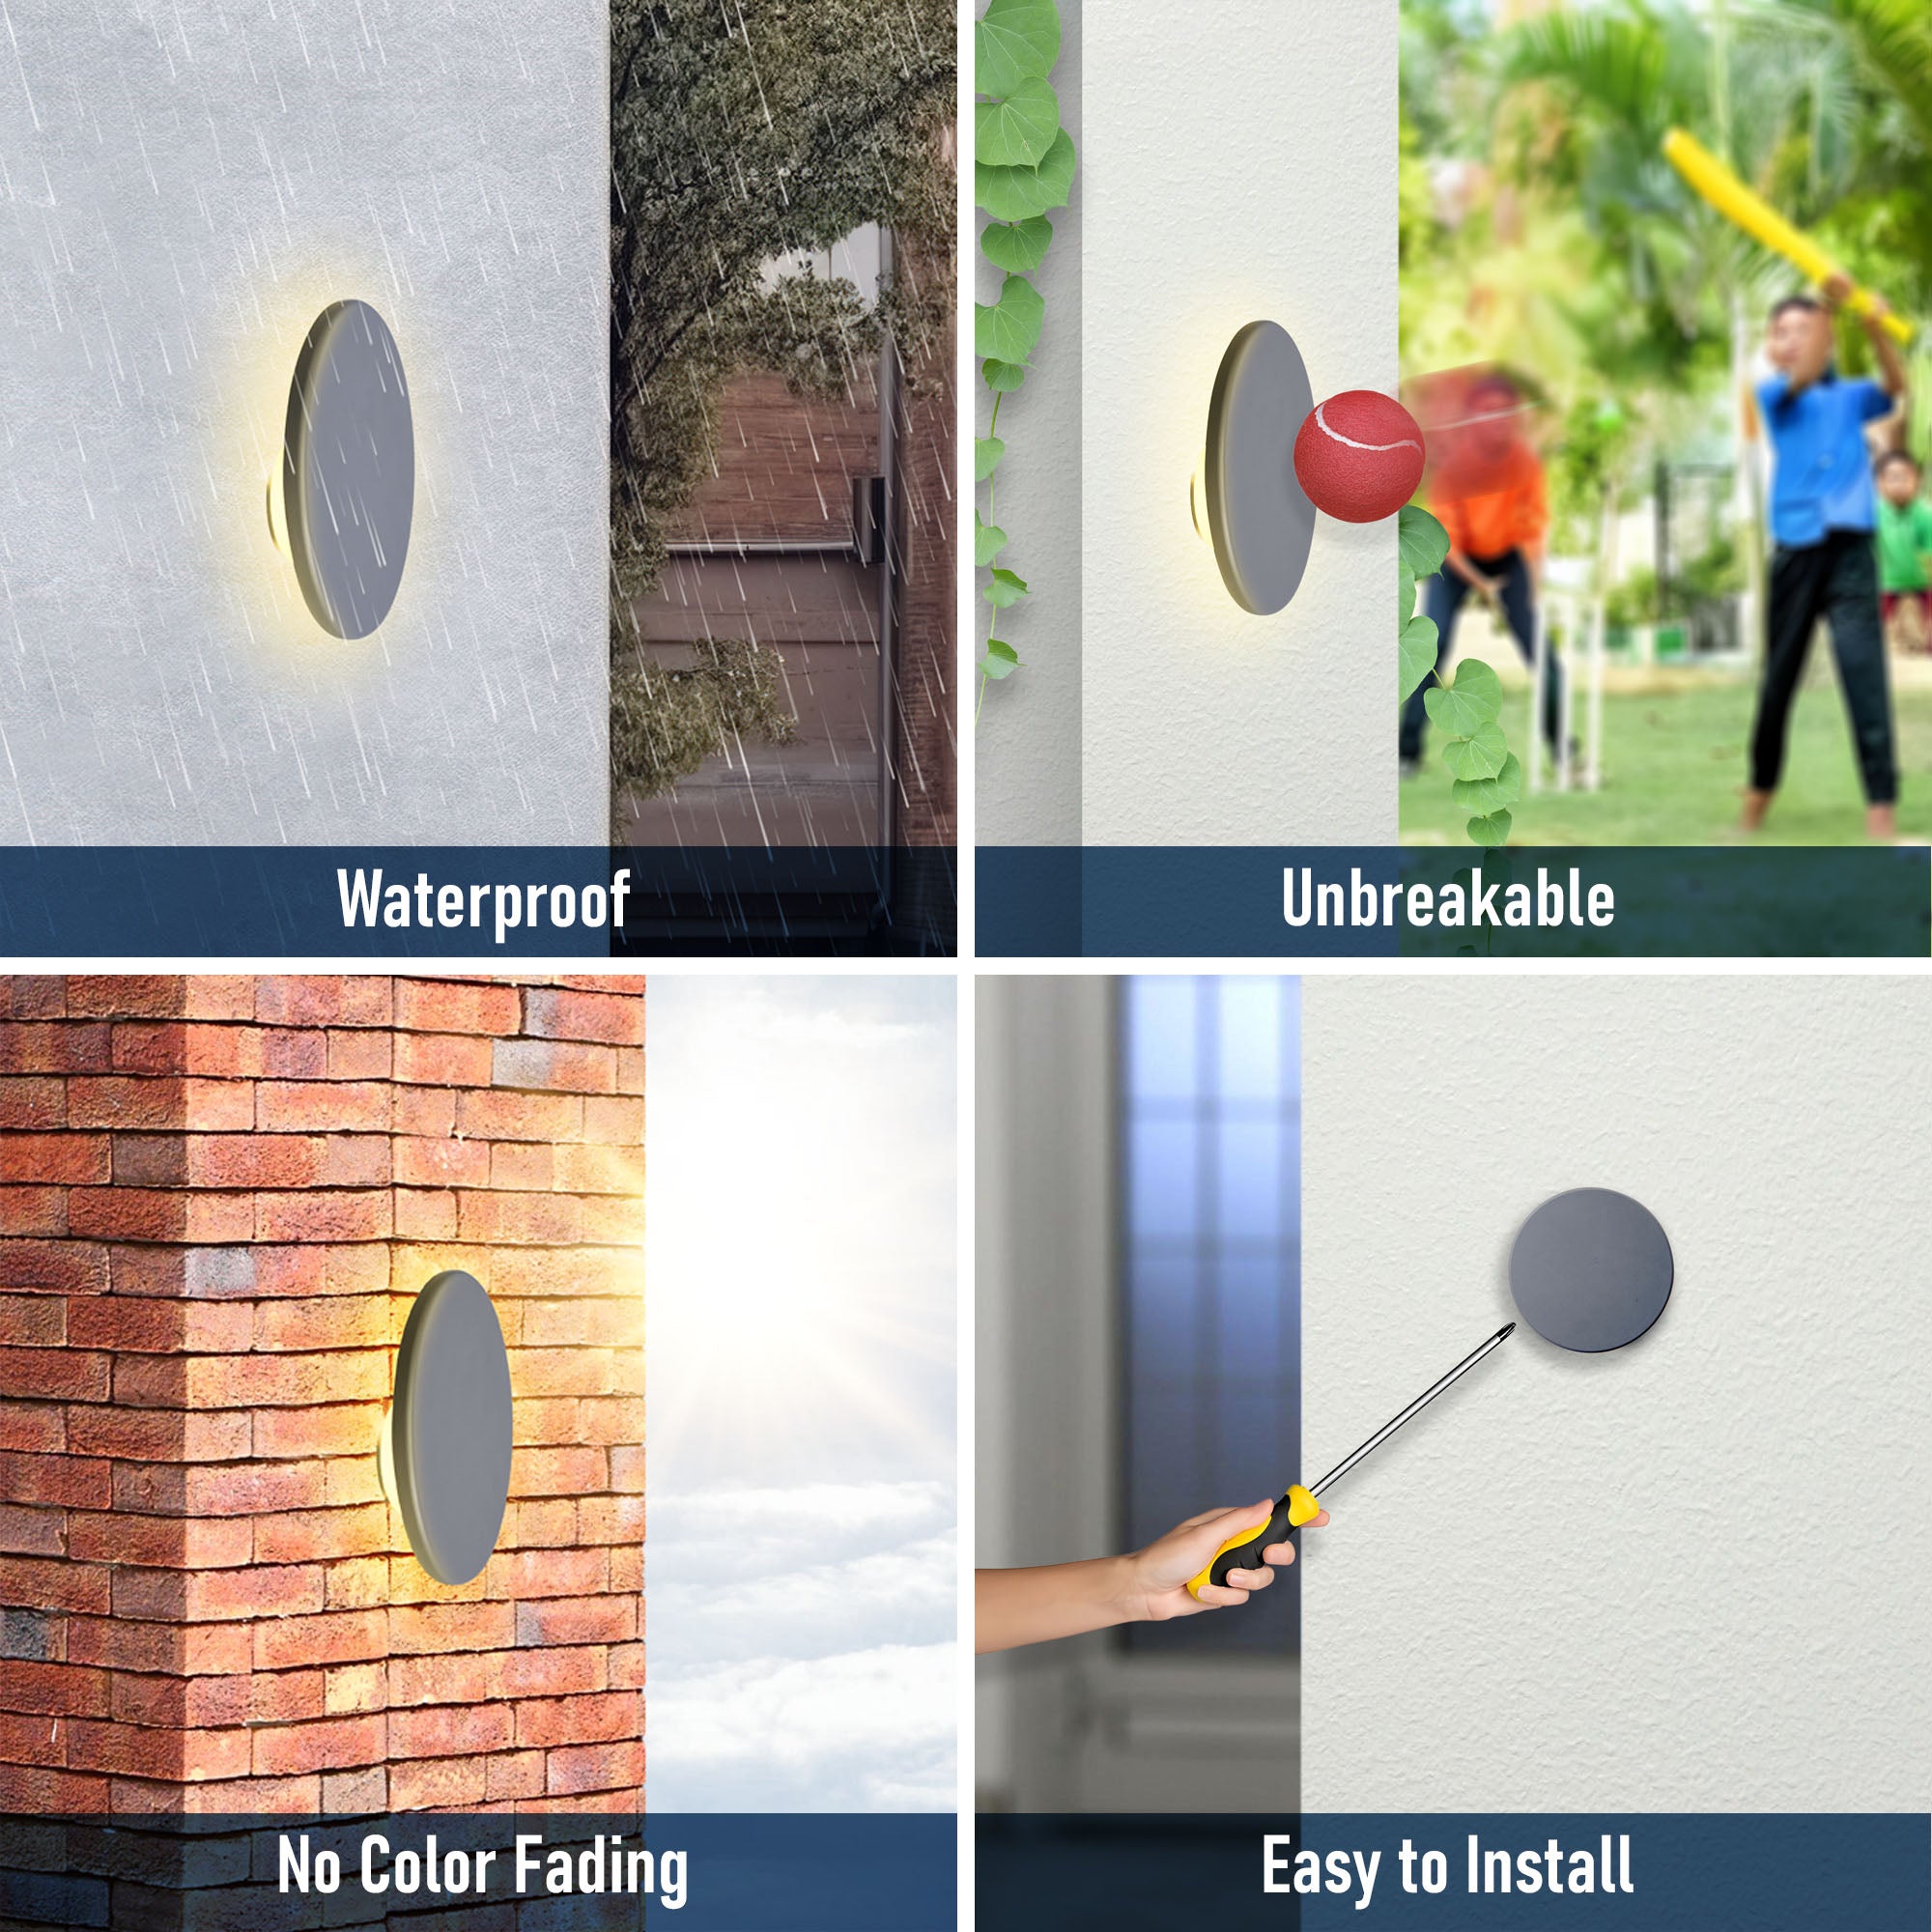 Features of Romy led wall light